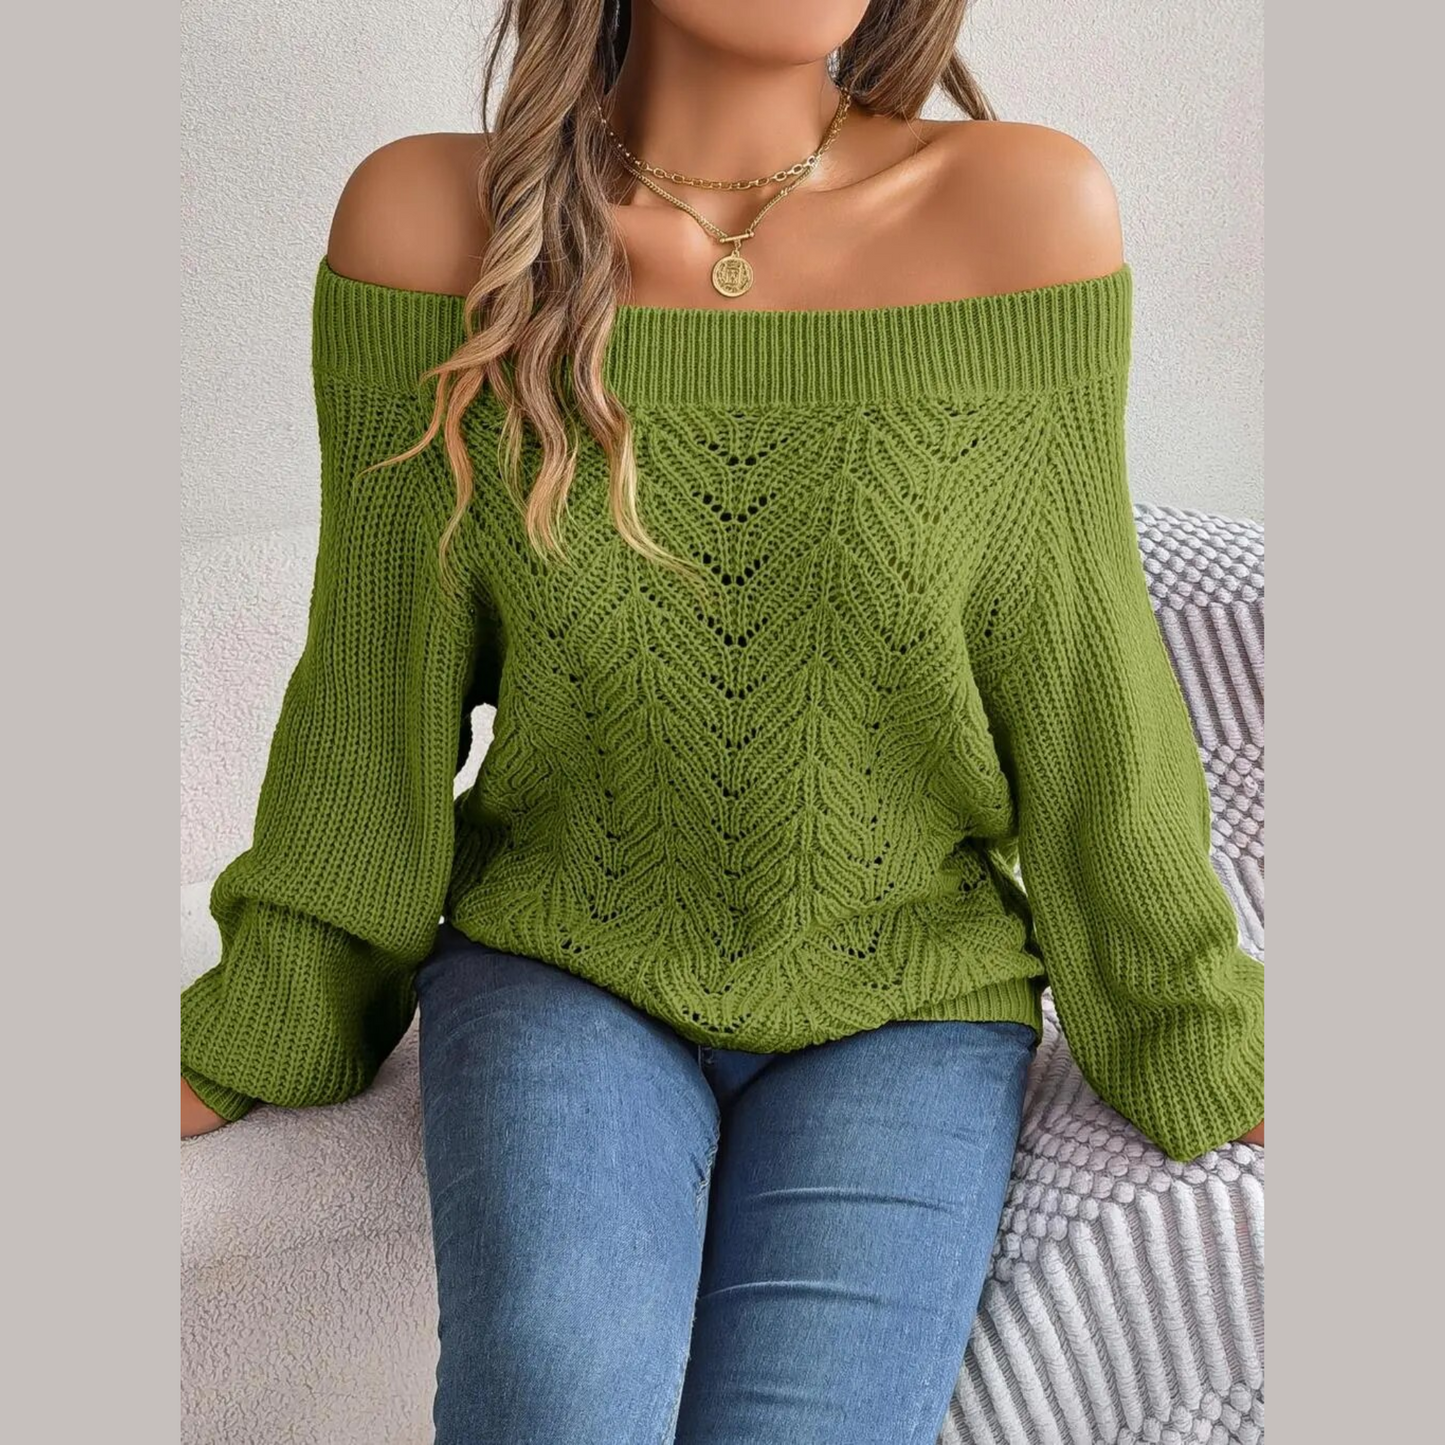 Loni - Green Knitted Off The Shoulder Sweater Top